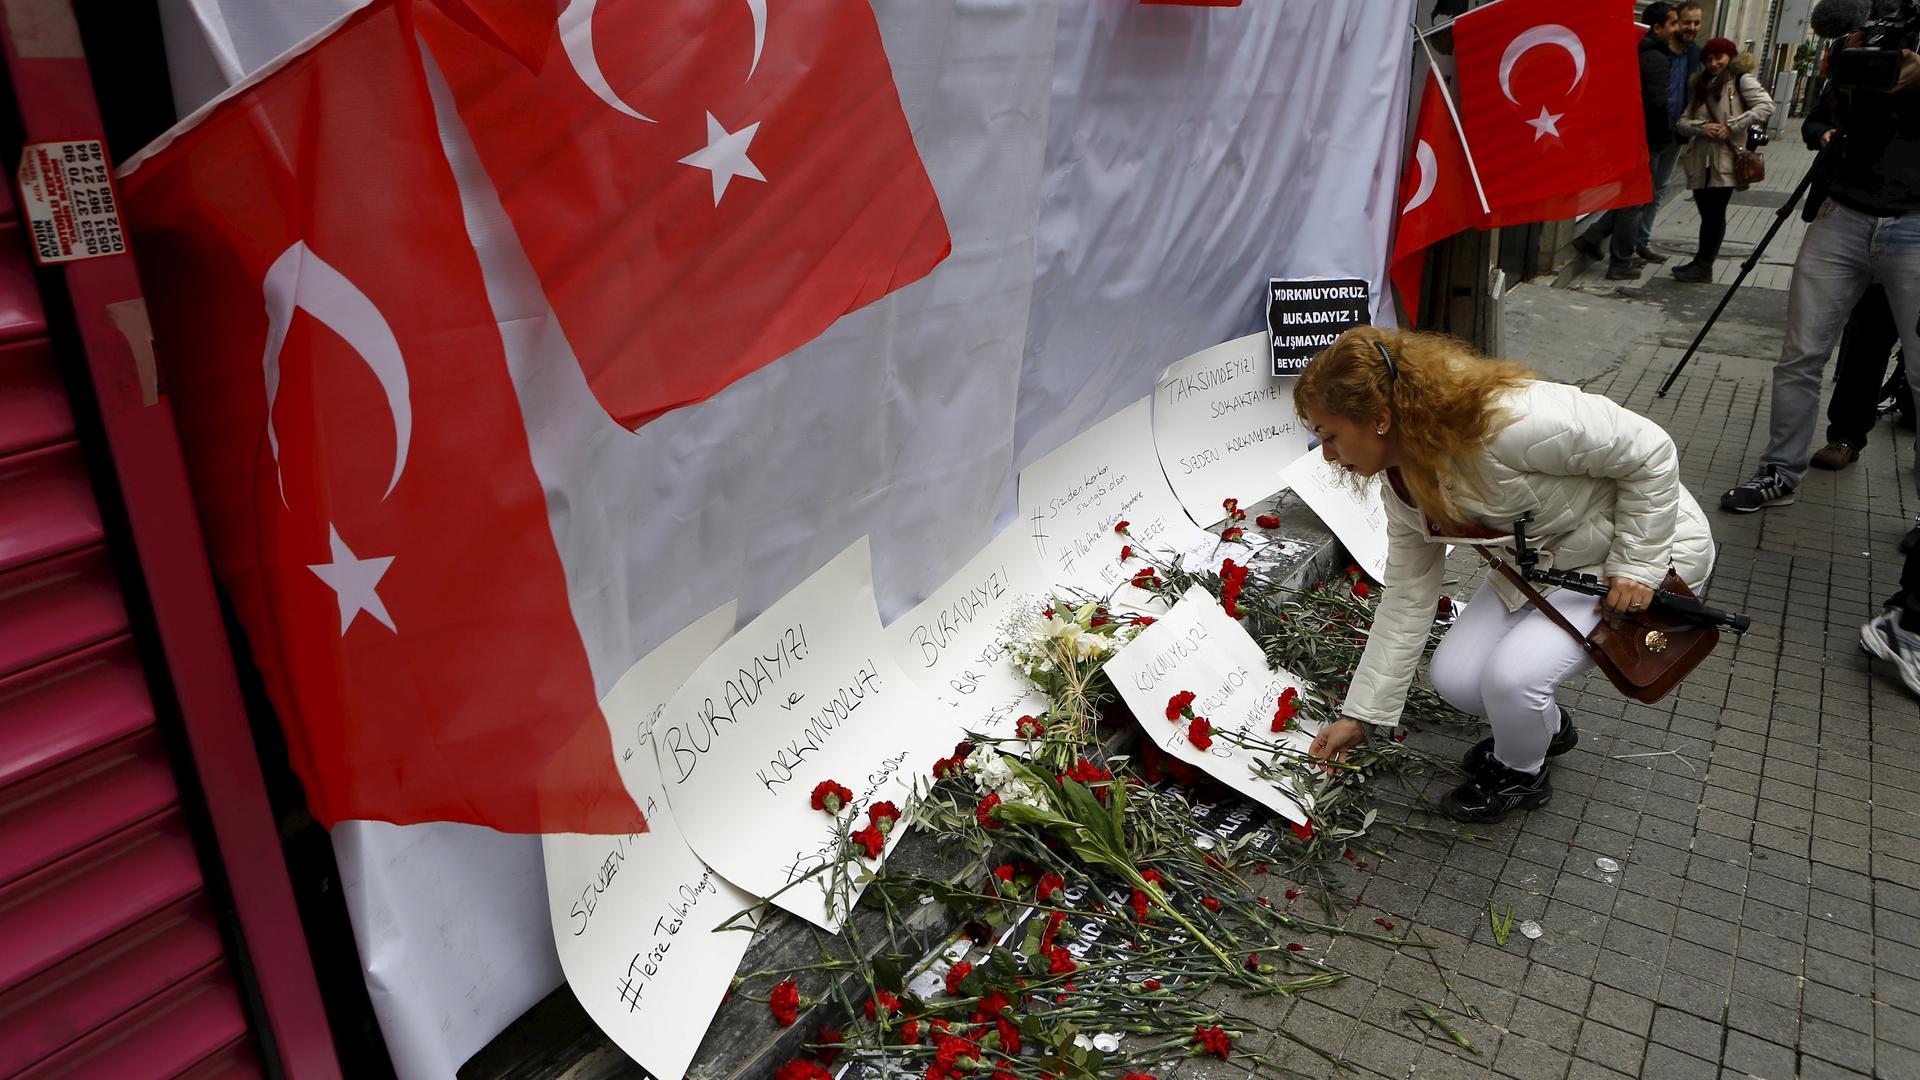 A woman places carnations at the scene of a suicide bombing at Istiklal Street, a major shopping and tourist district, in central Istanbul, Turkey.